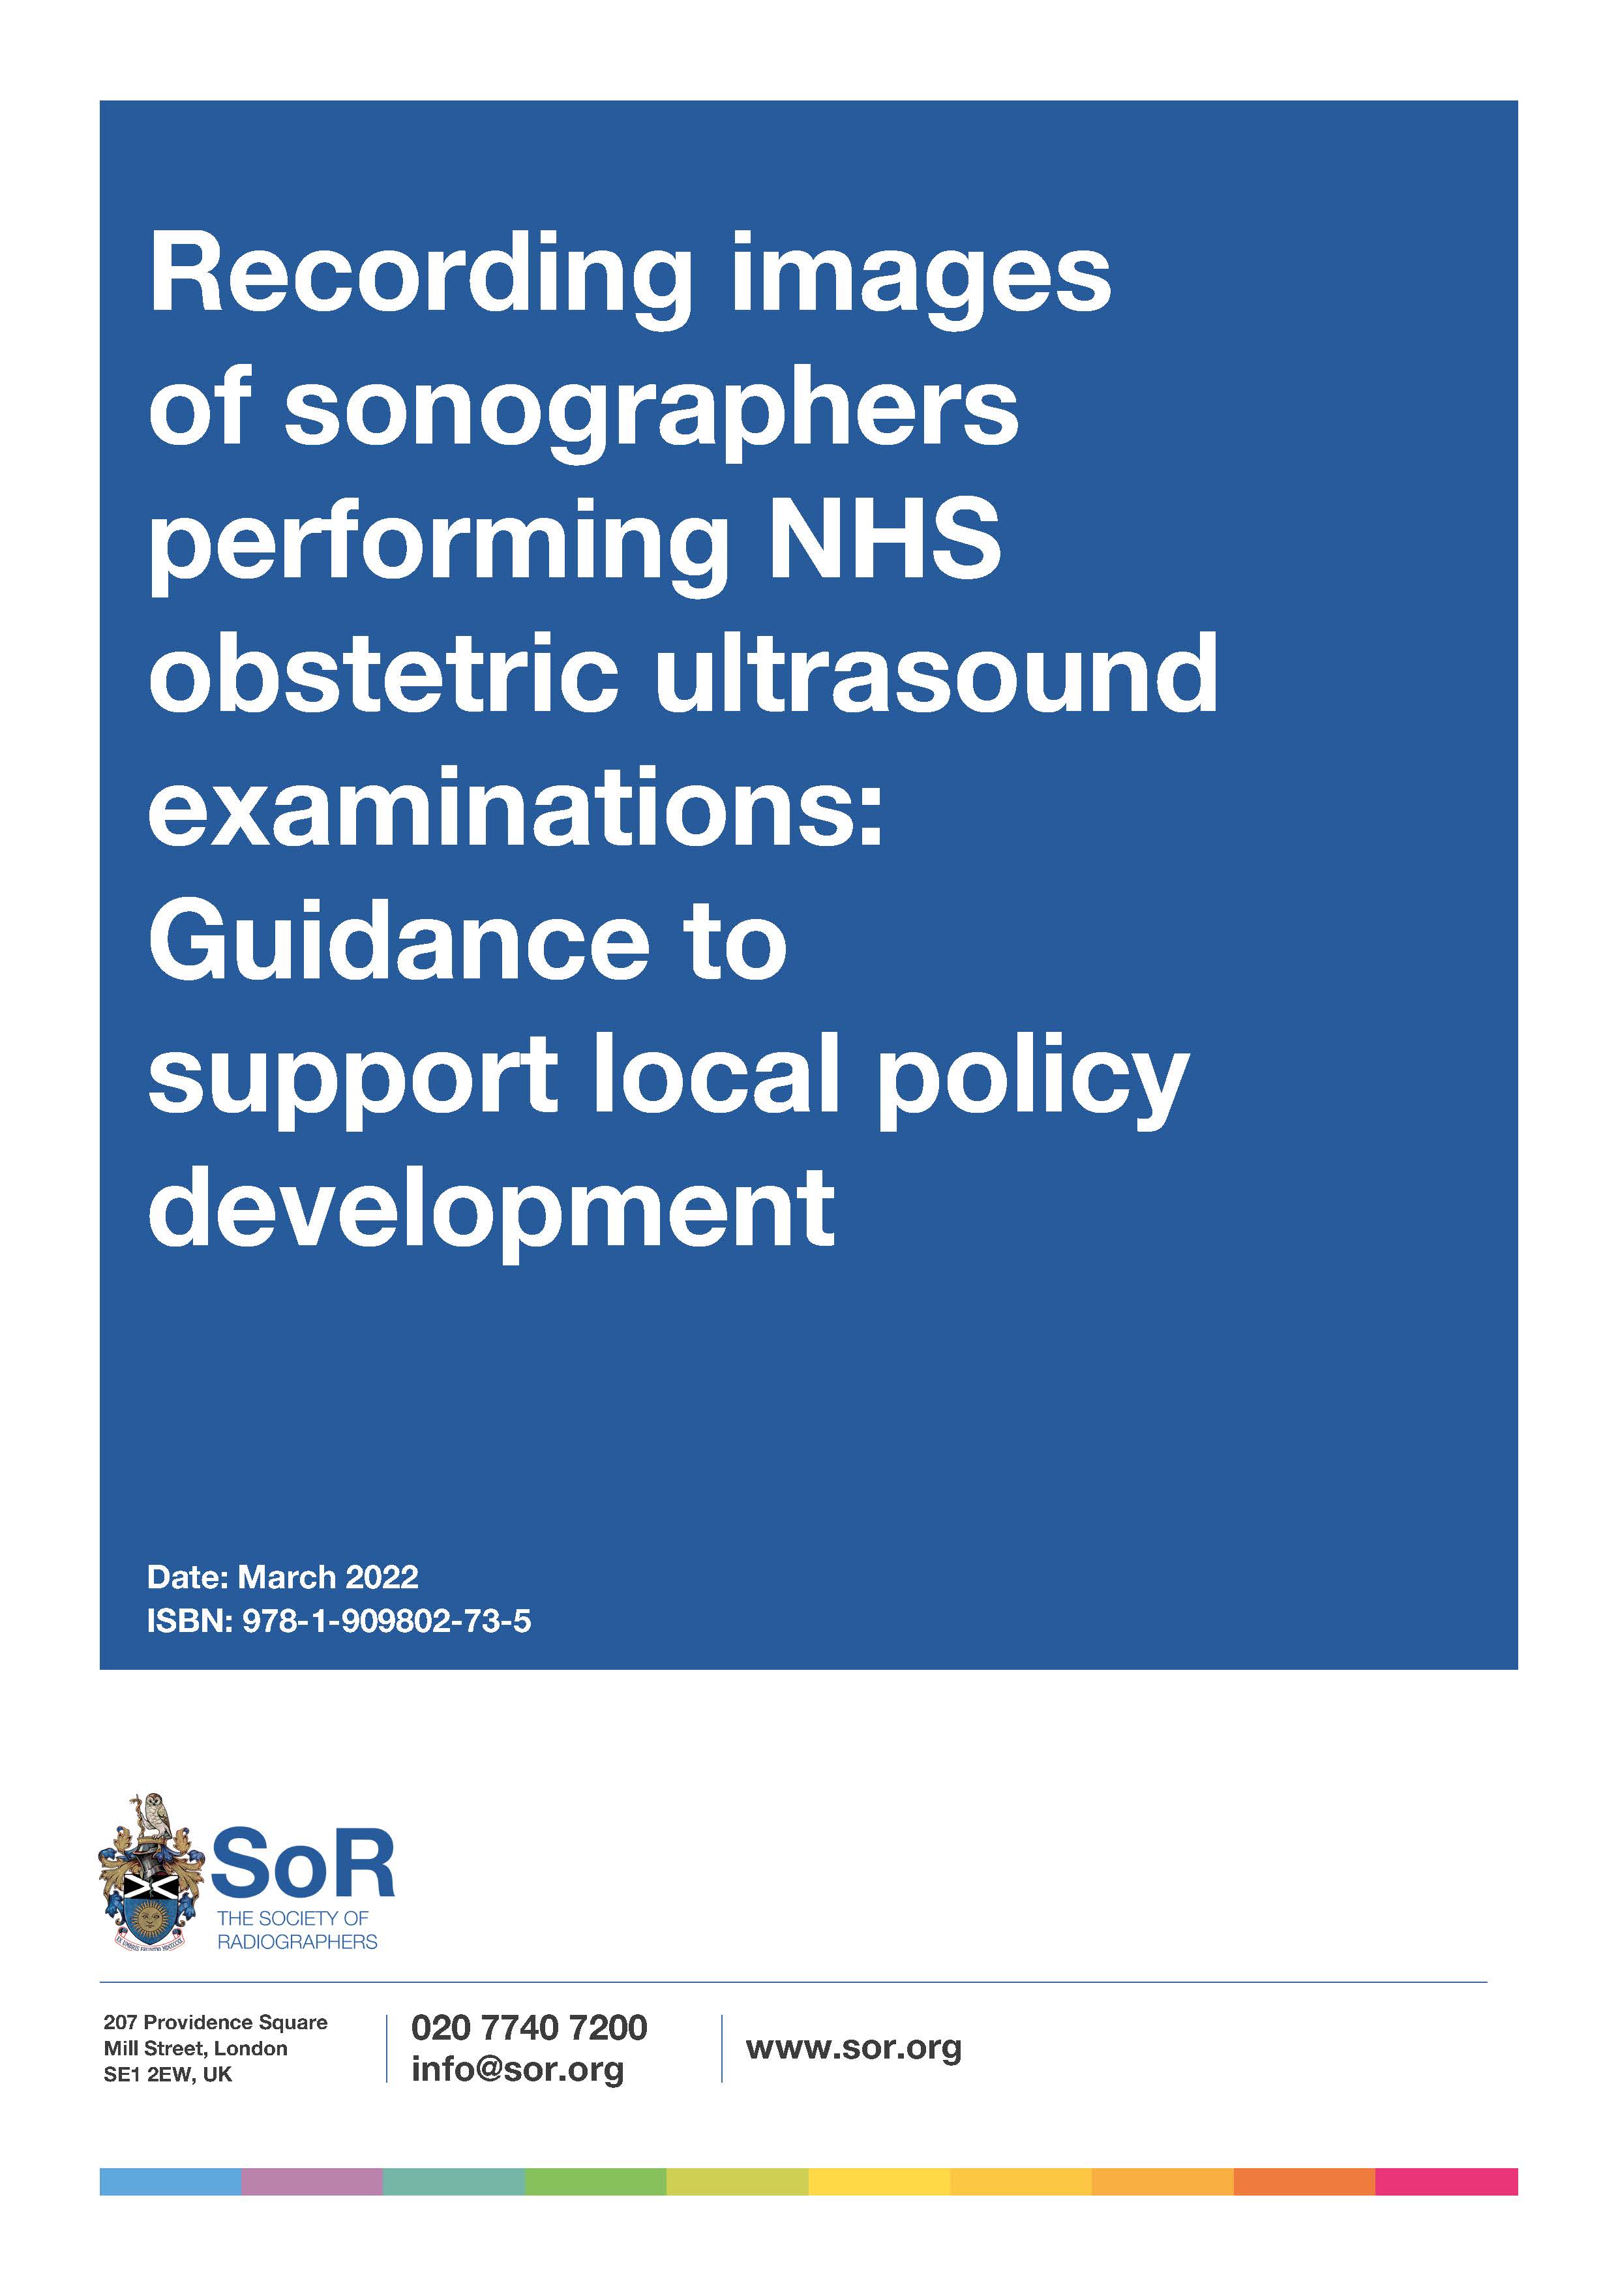 Recording images of sonographers performing NHS obstetric ultrasound examinations: Guidance to support local policy development 